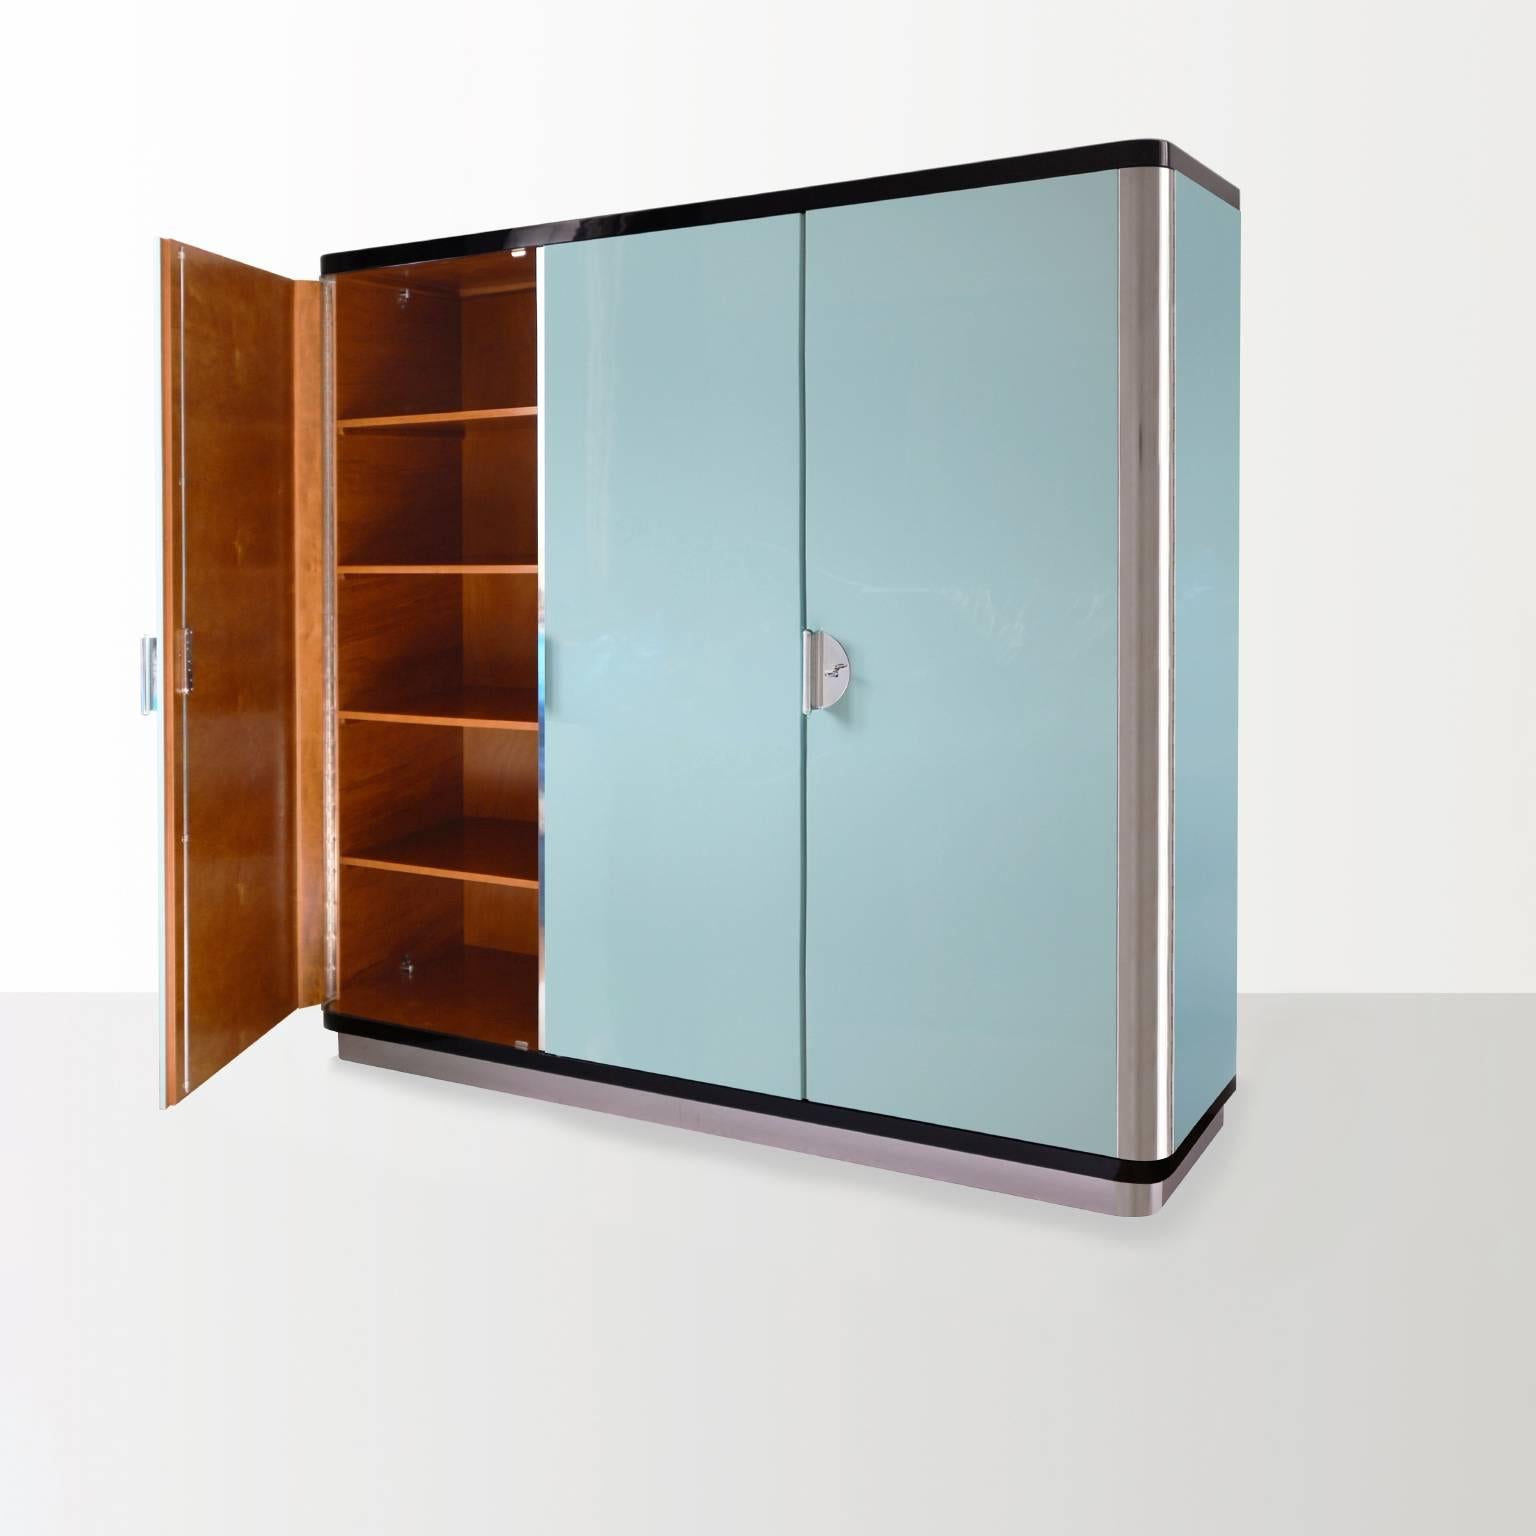 German Customized Art Deco Streamline Three-Door Wardrobe in High-Gloss Lacquered Wood For Sale